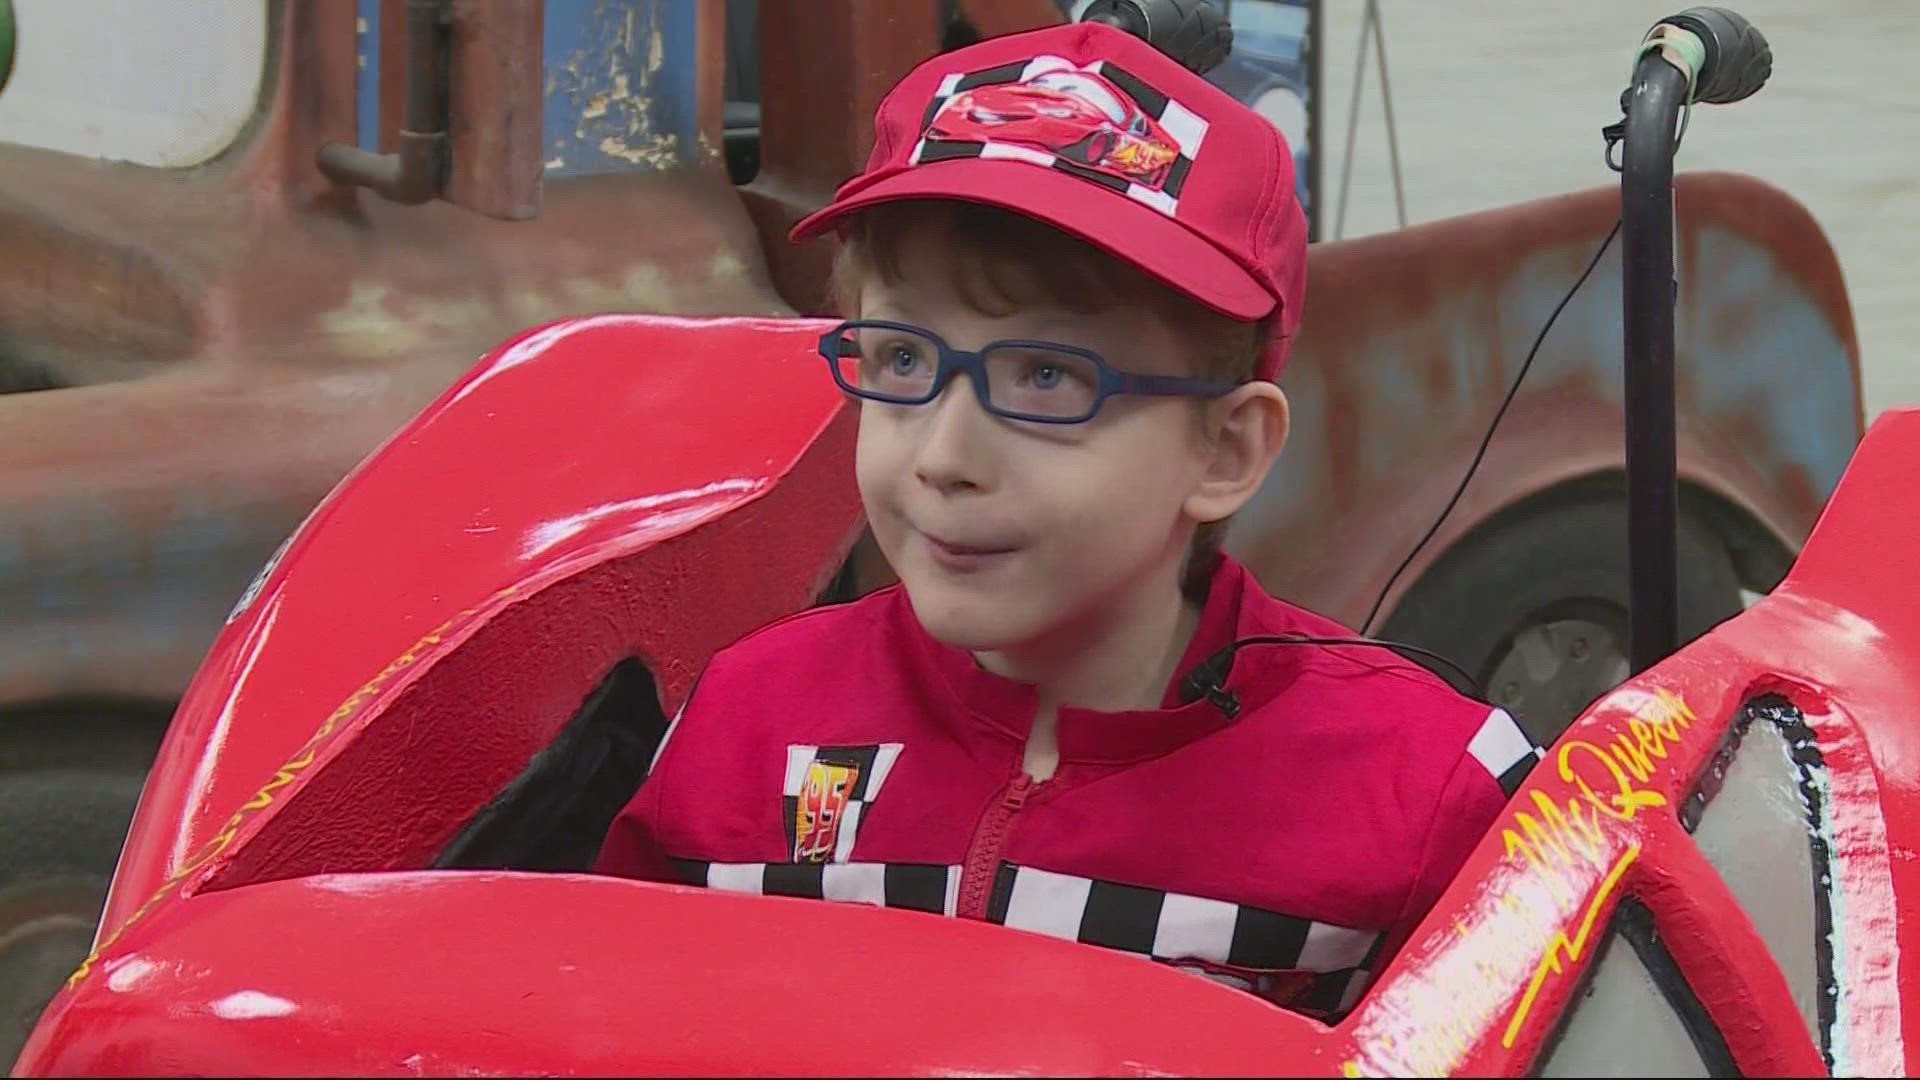 For Halloween, the nonprofit Magic Wheelchair transformed a 6-year-old Evan's wheelchair into his favorite character from the movie 'Cars.'